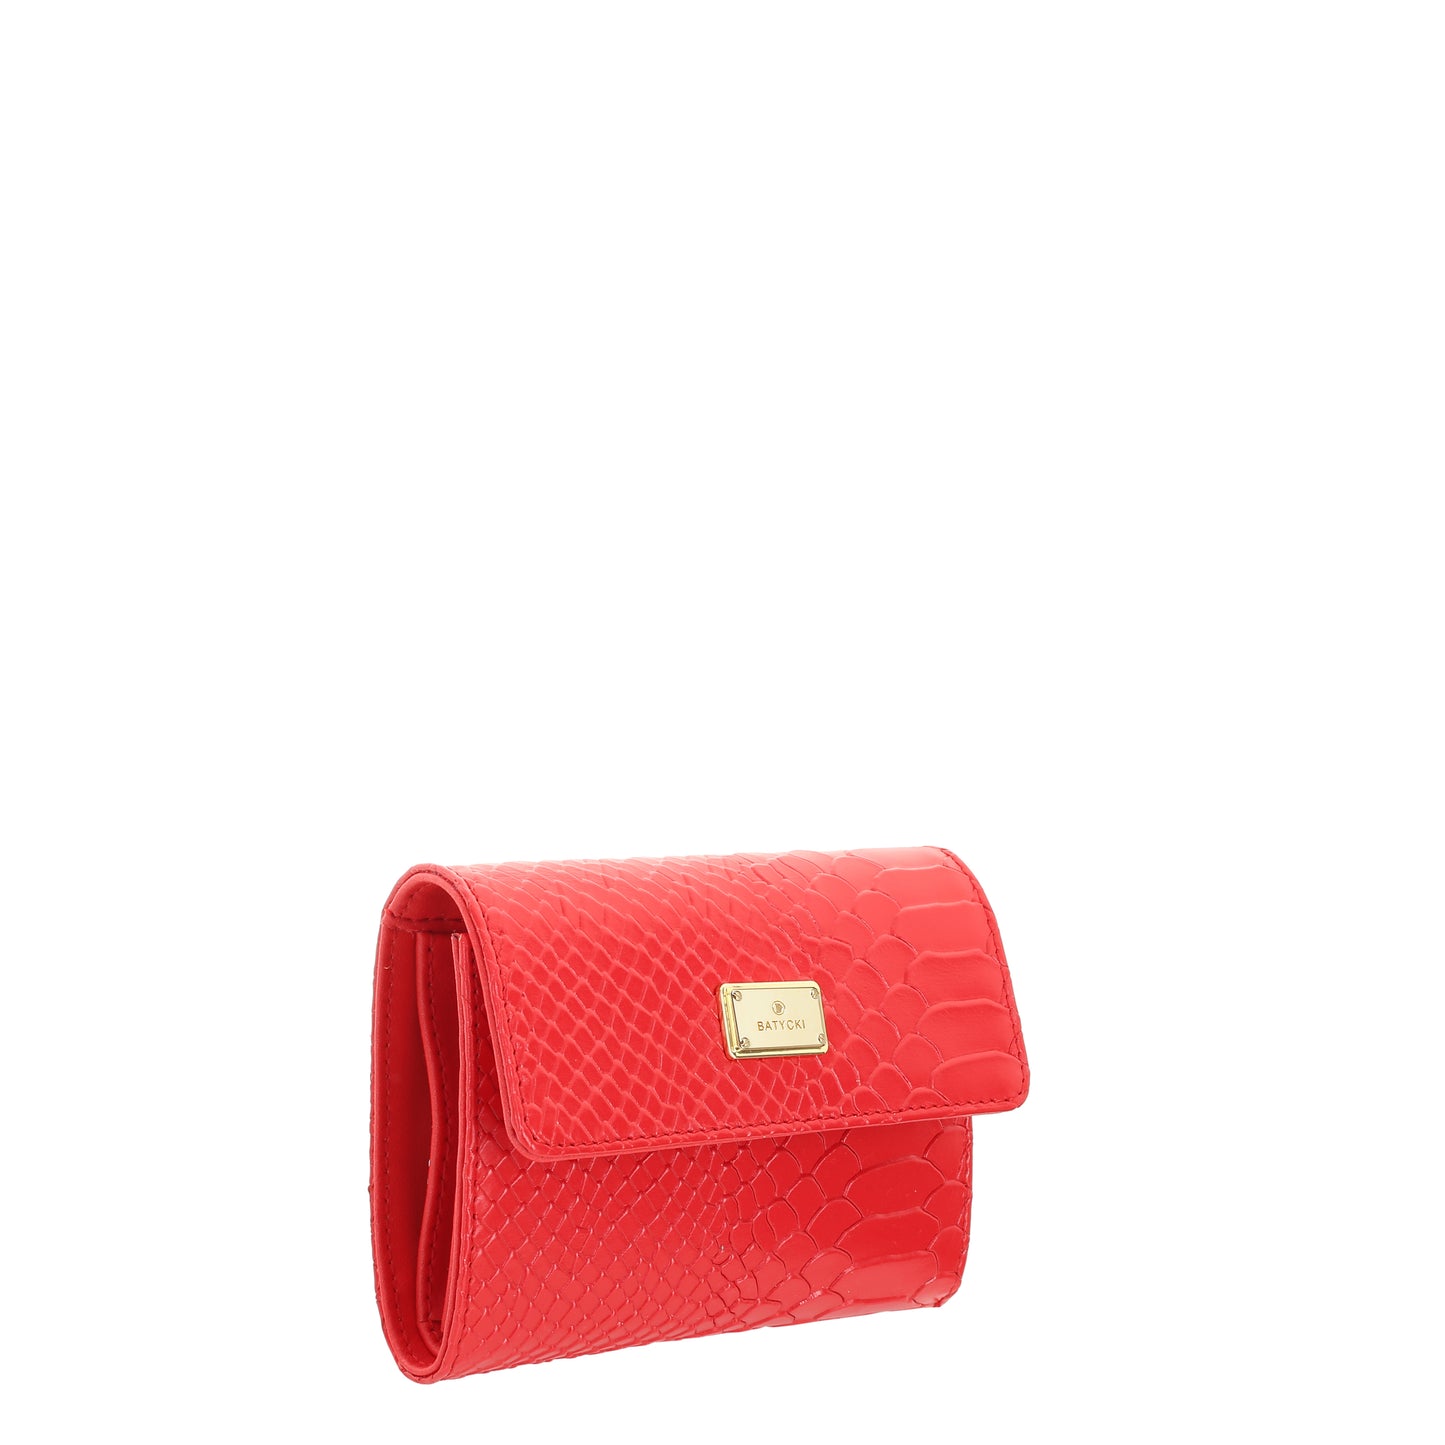 Women's leather wallet red